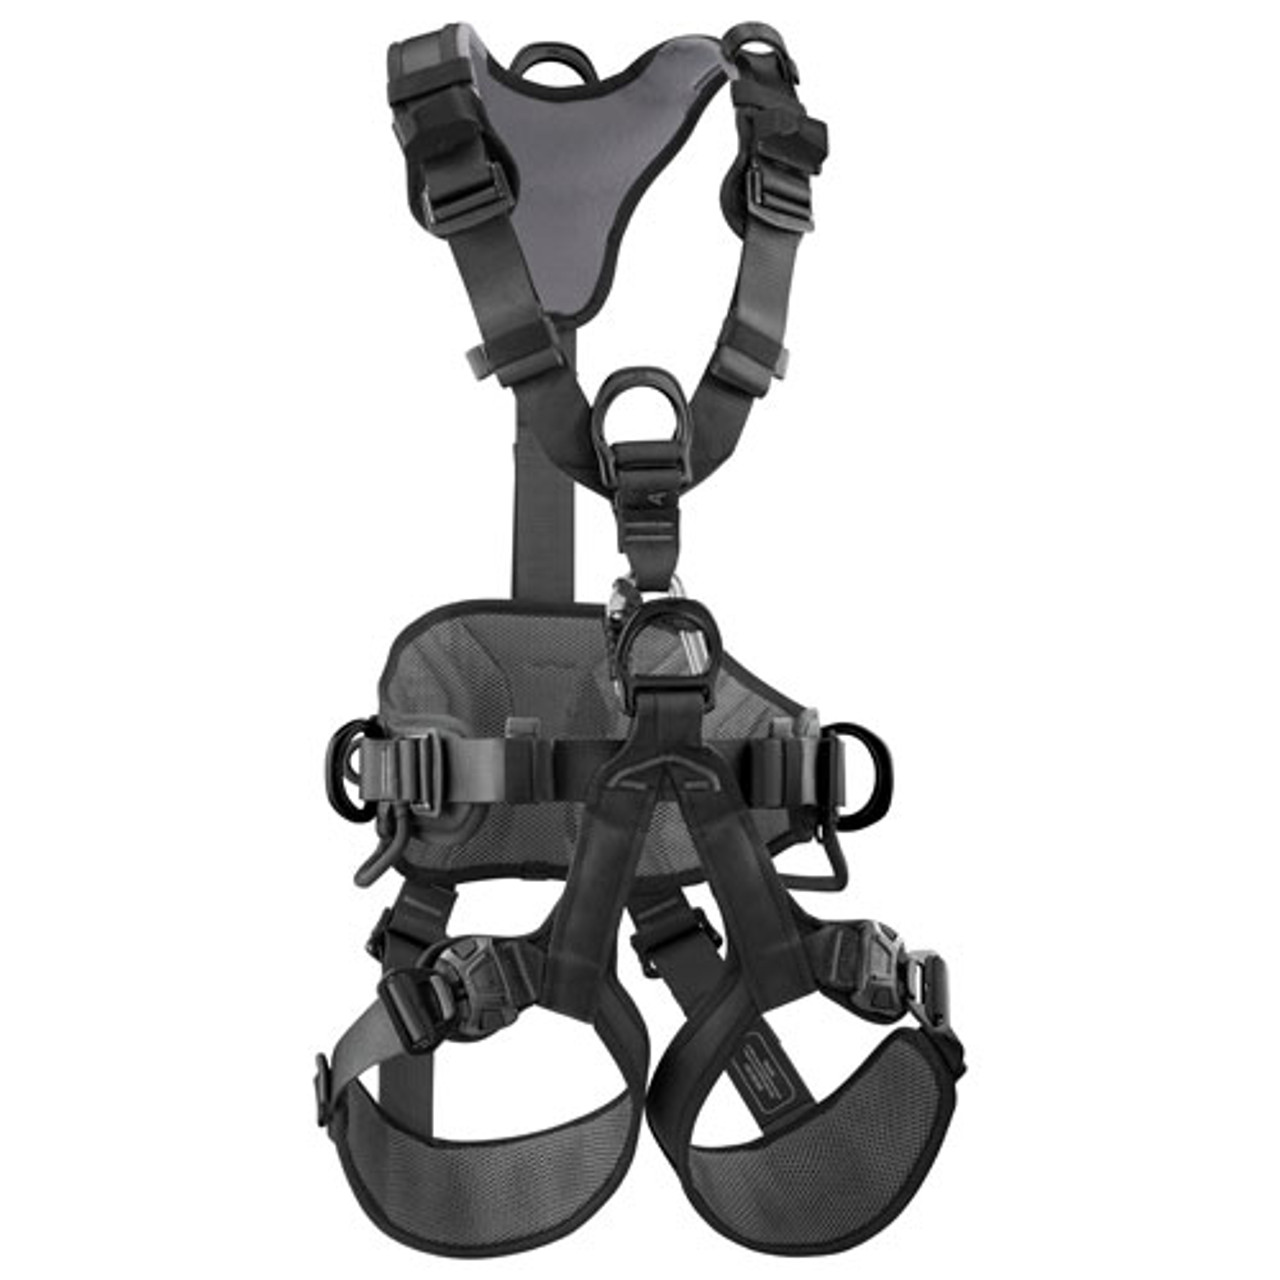 Petzl Avao Bod Fast Black Work & Rescue Harness - Size 0 